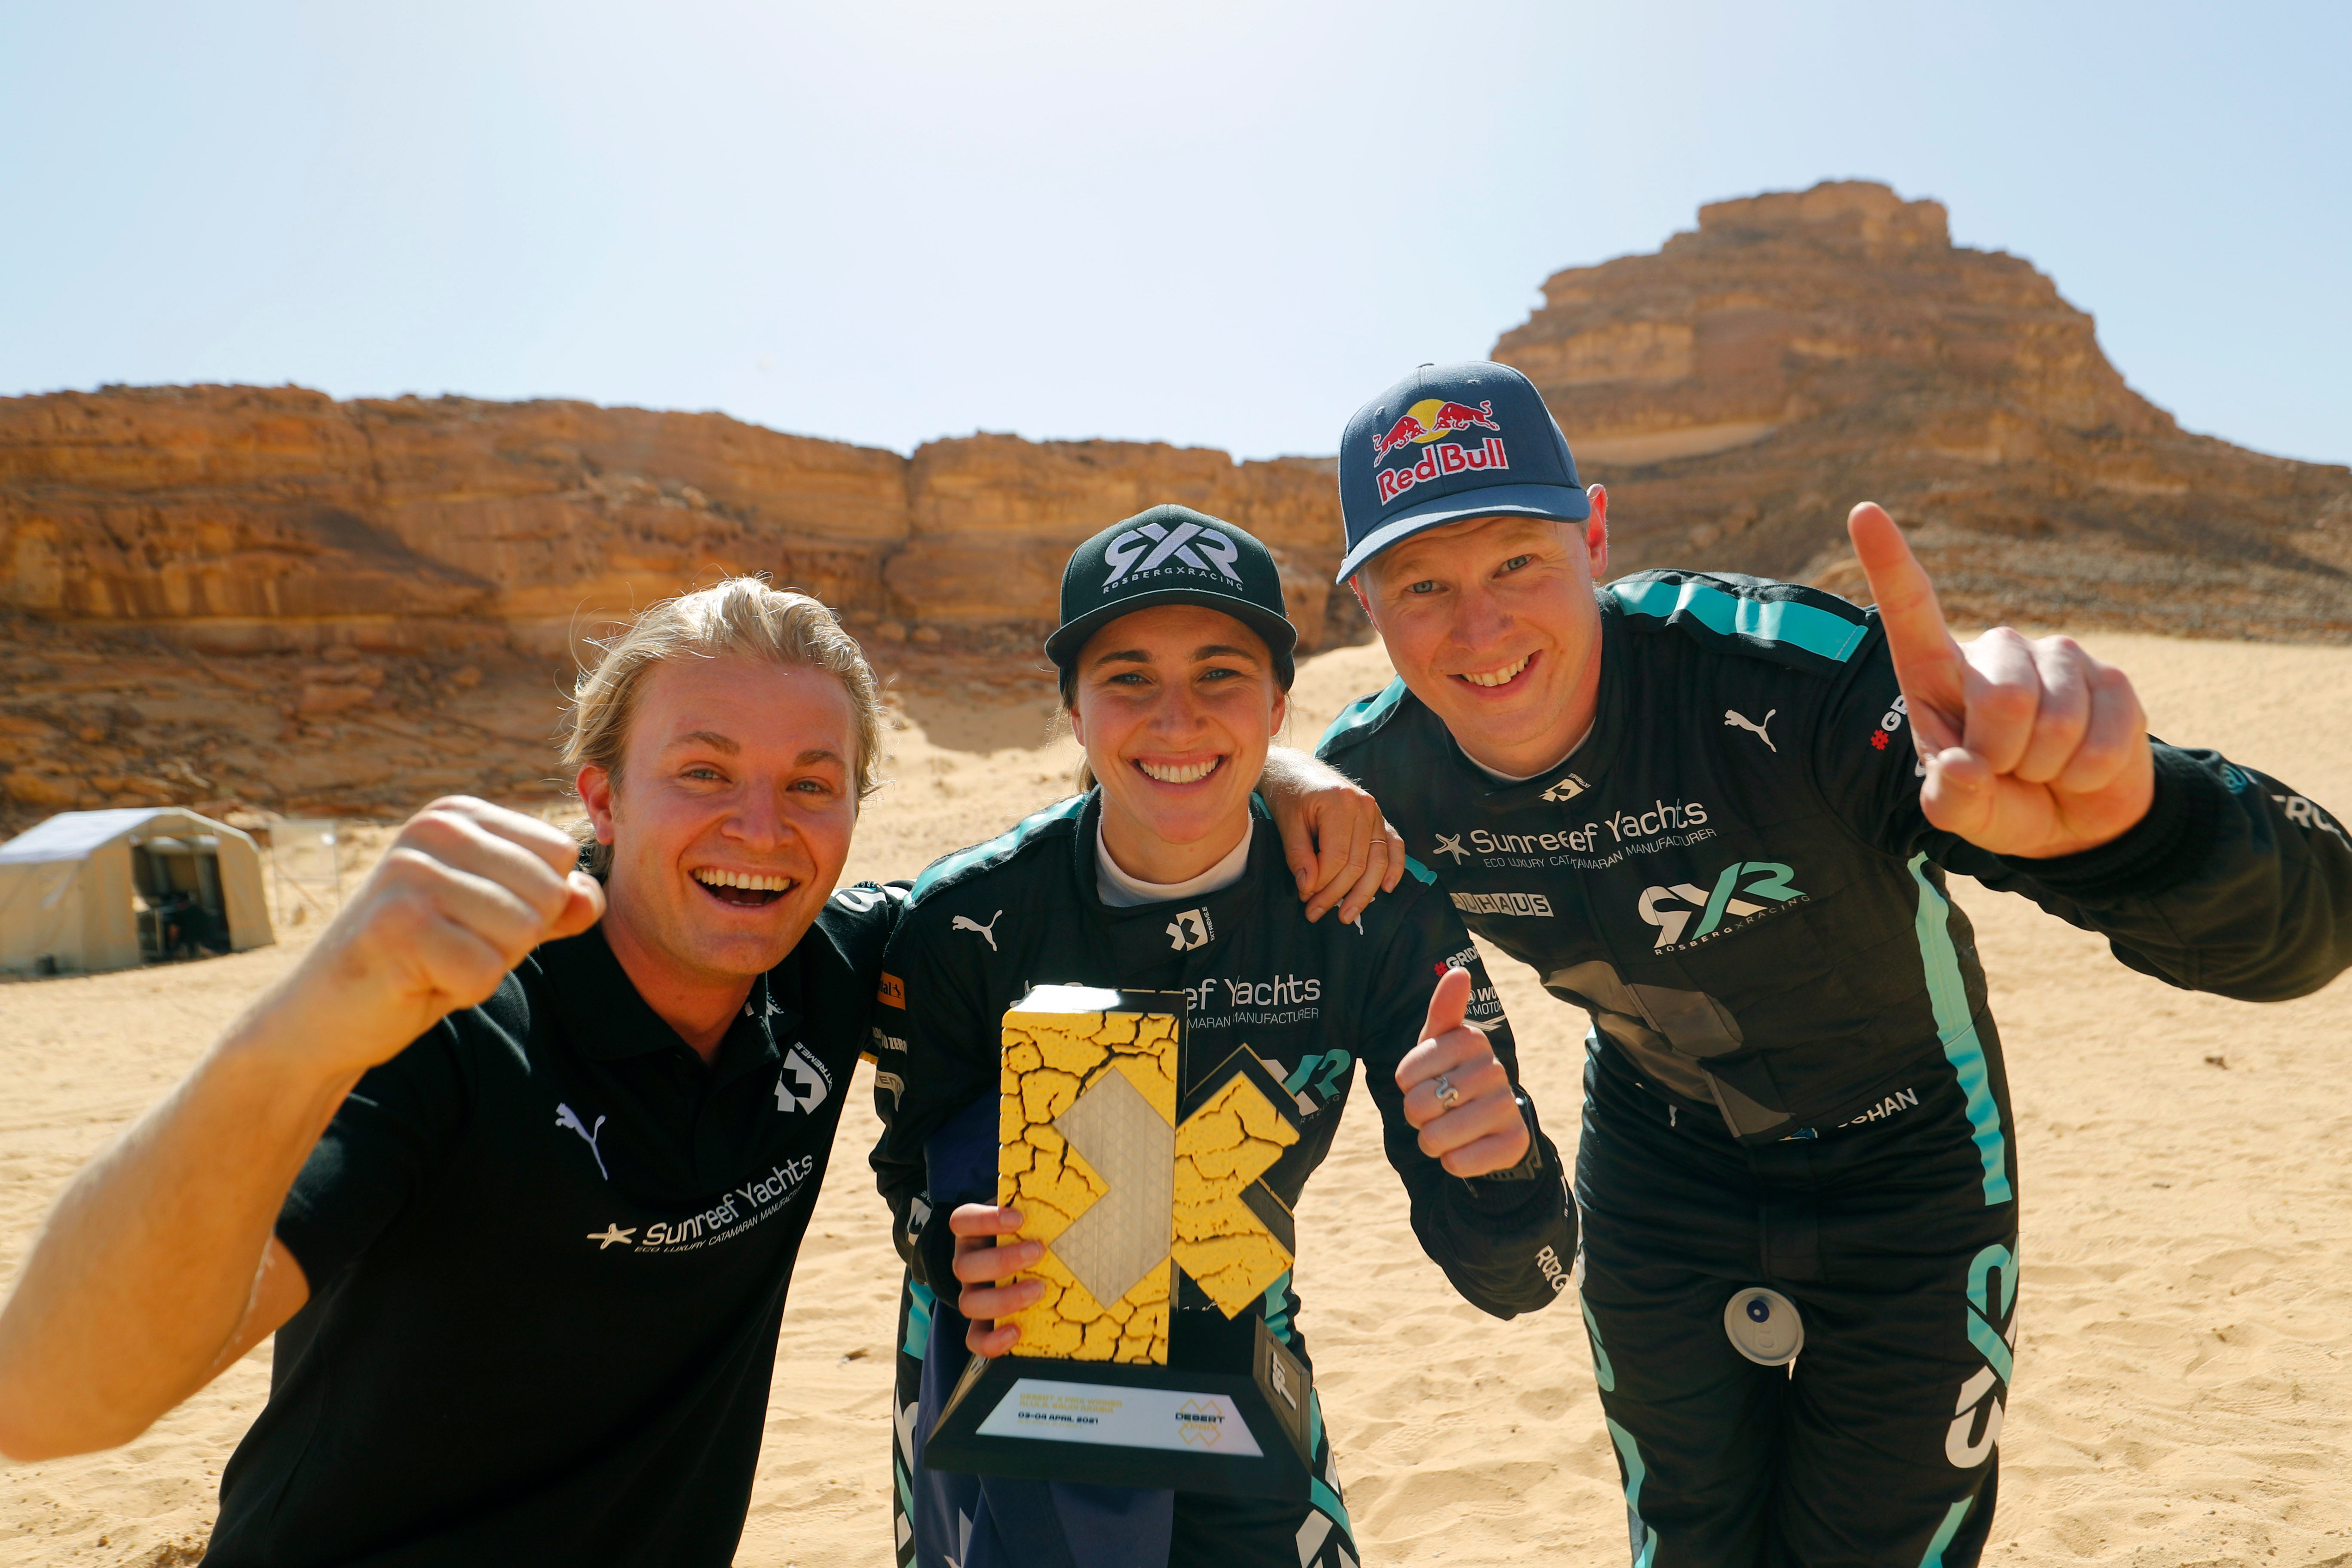 Rosberg XR powered clear to victory in AlUla